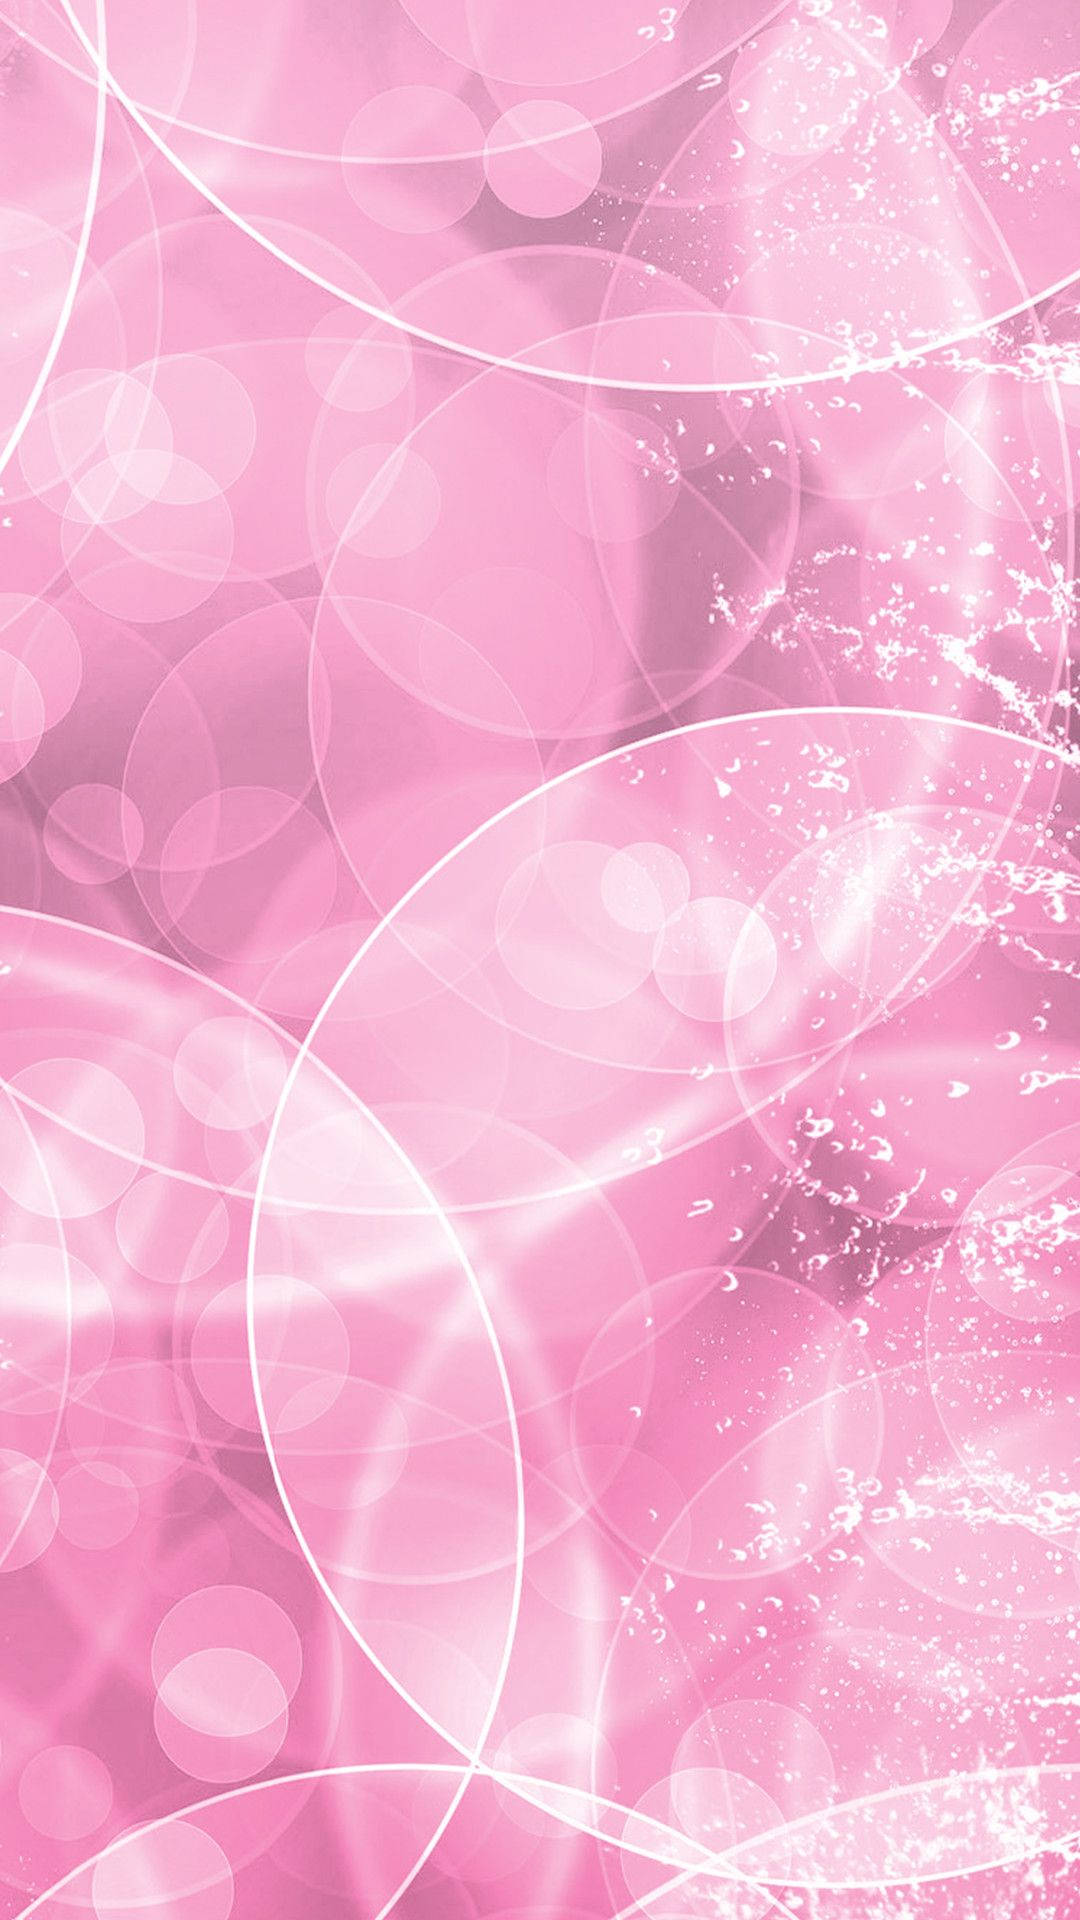 Worry-free living in the bubble of girly happiness Wallpaper